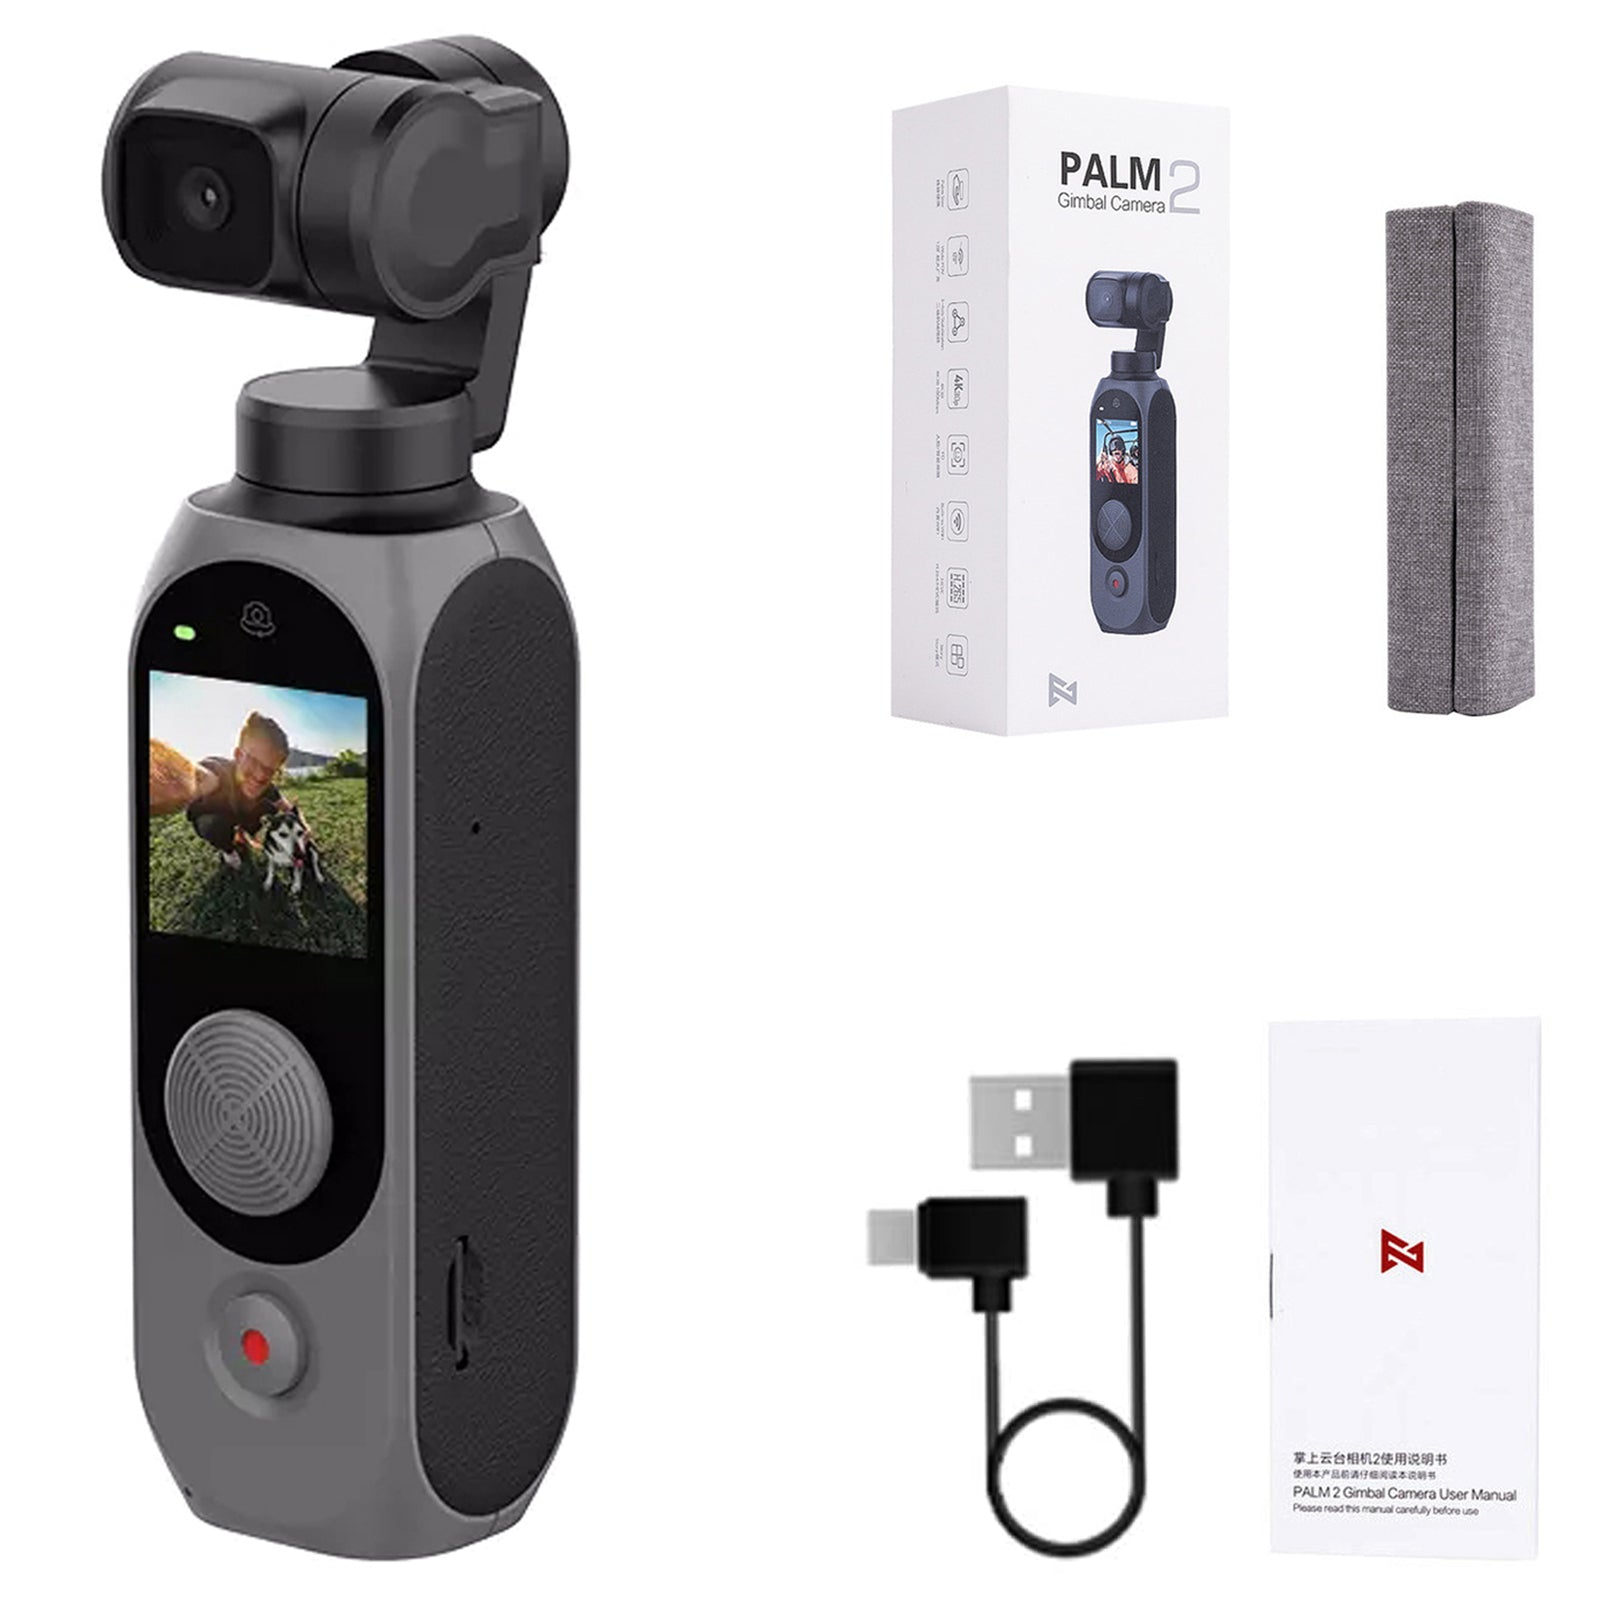 FIMI Palm 2 Gimbal Camera with 128° 4K UHD Ultra Wide Angle Lens for Android and iPhone, Black